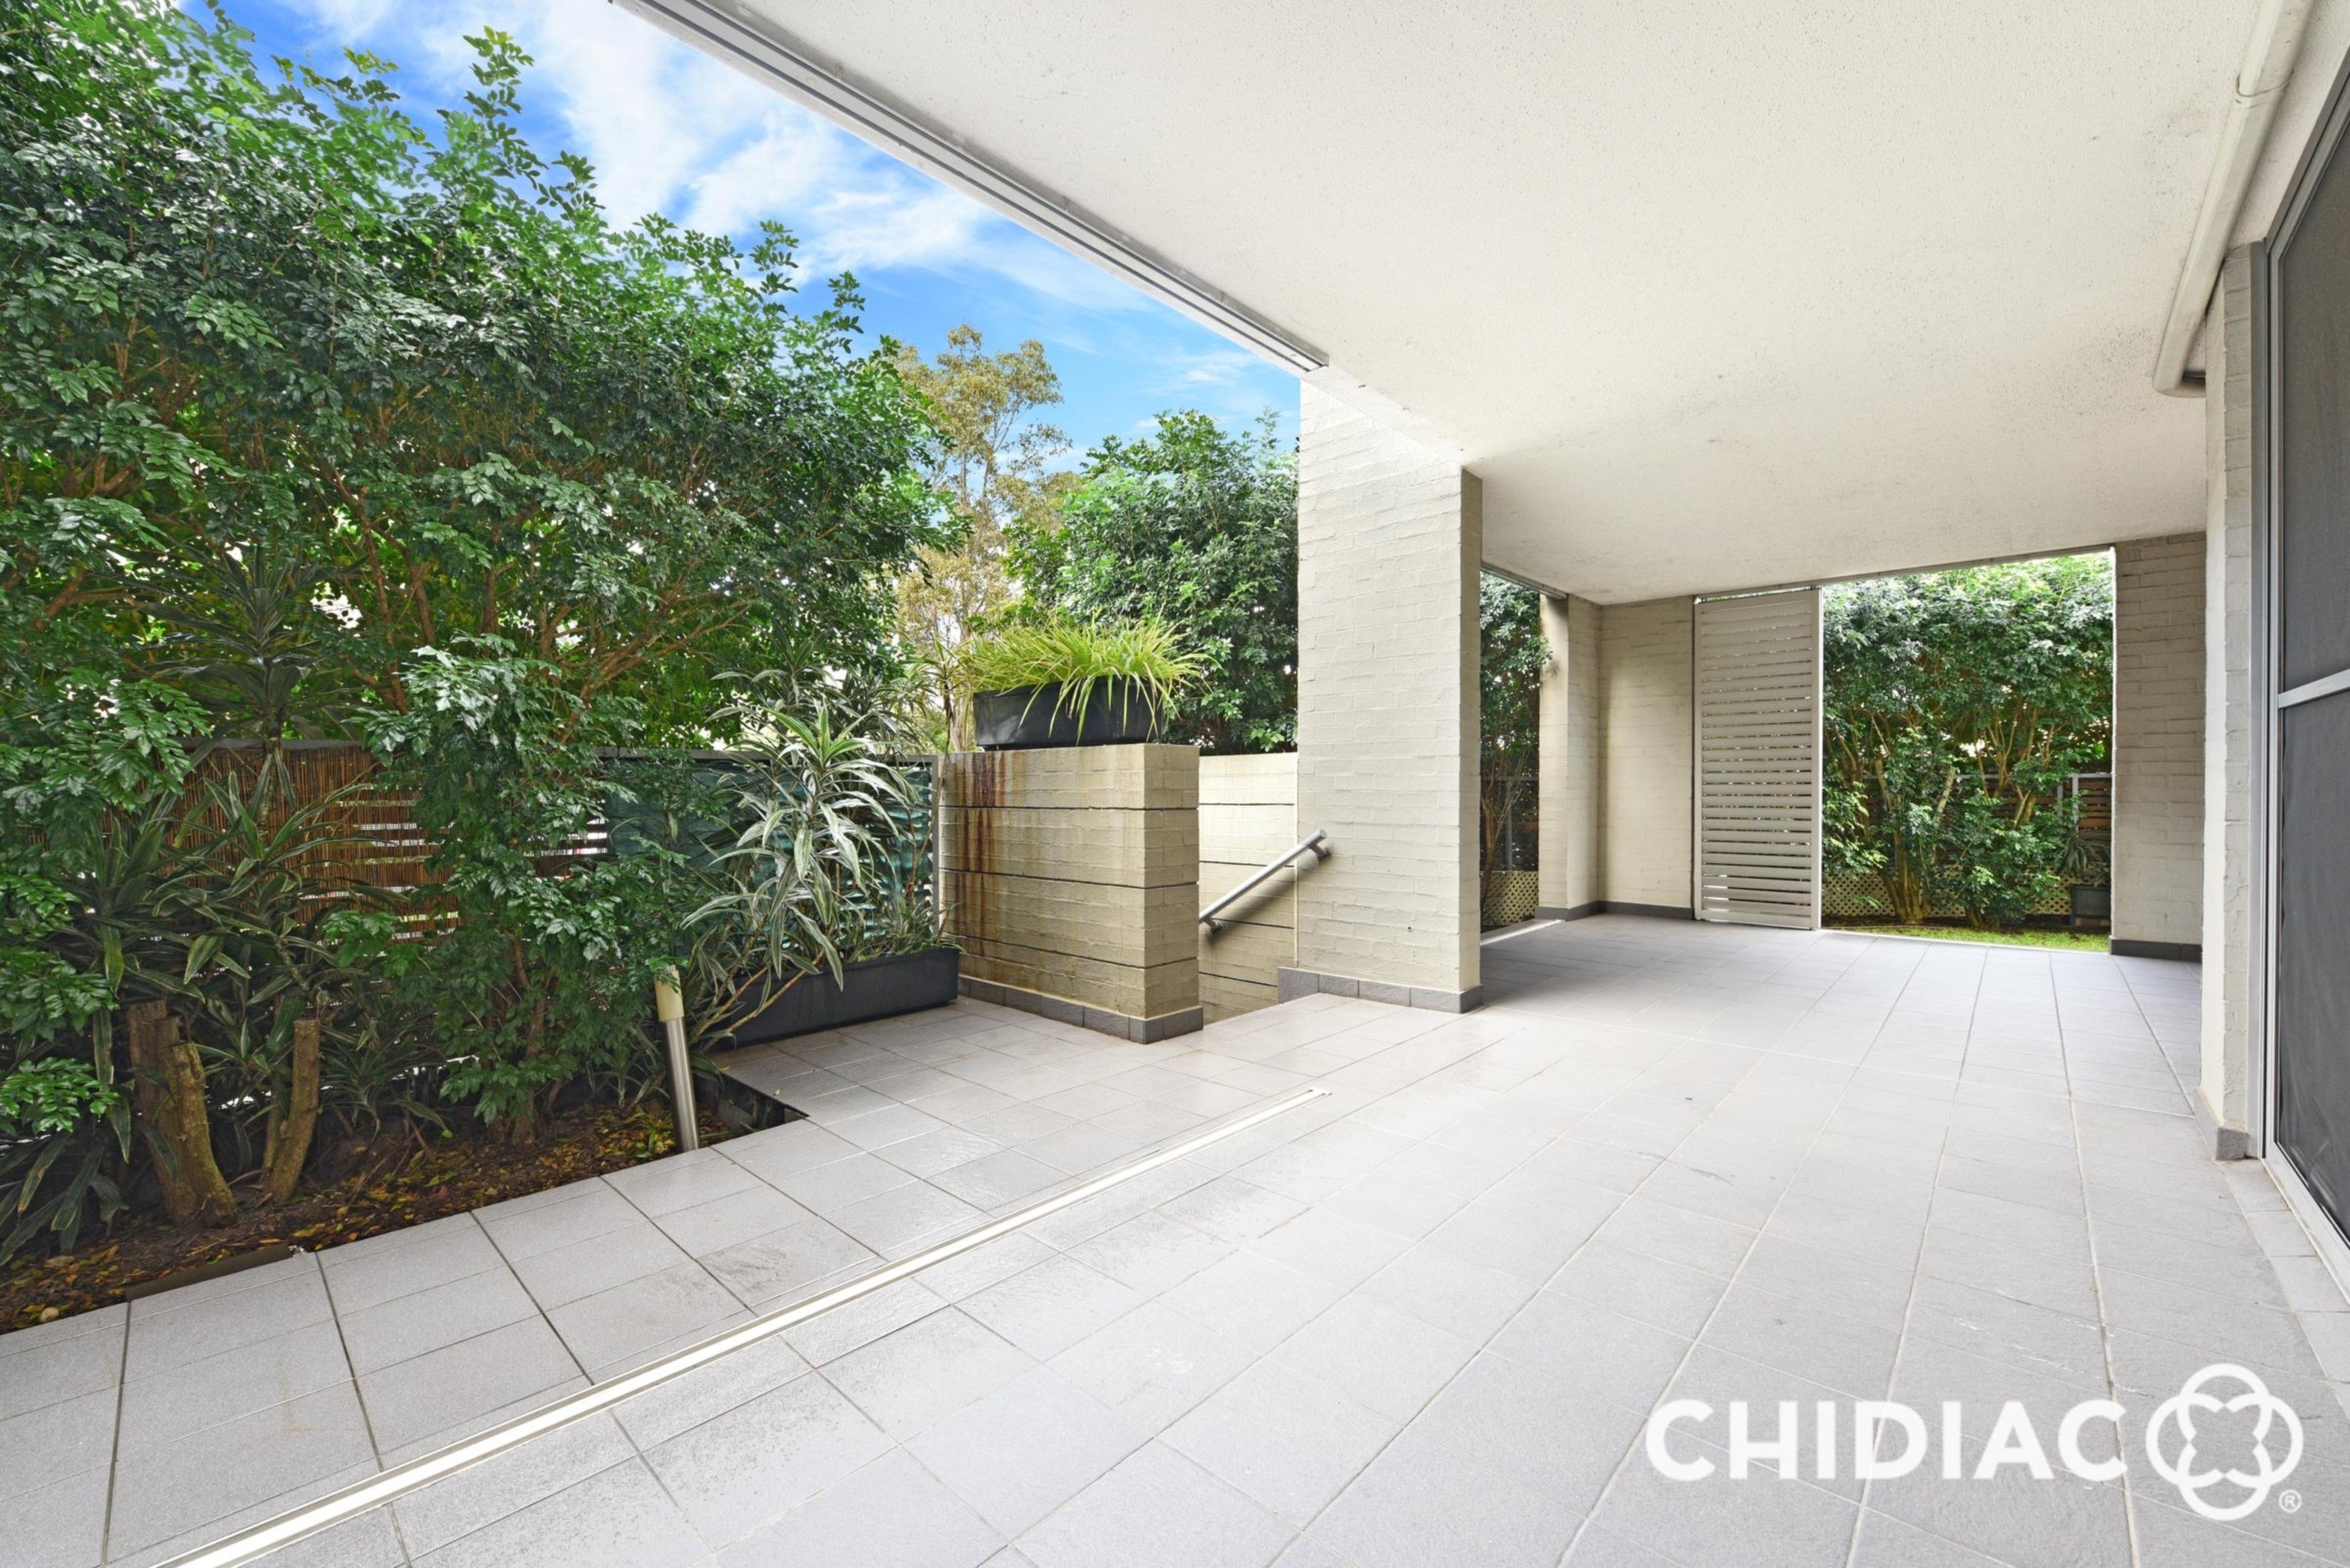 123/3 Stromboli Strait, Wentworth Point Leased by Chidiac Realty - image 1